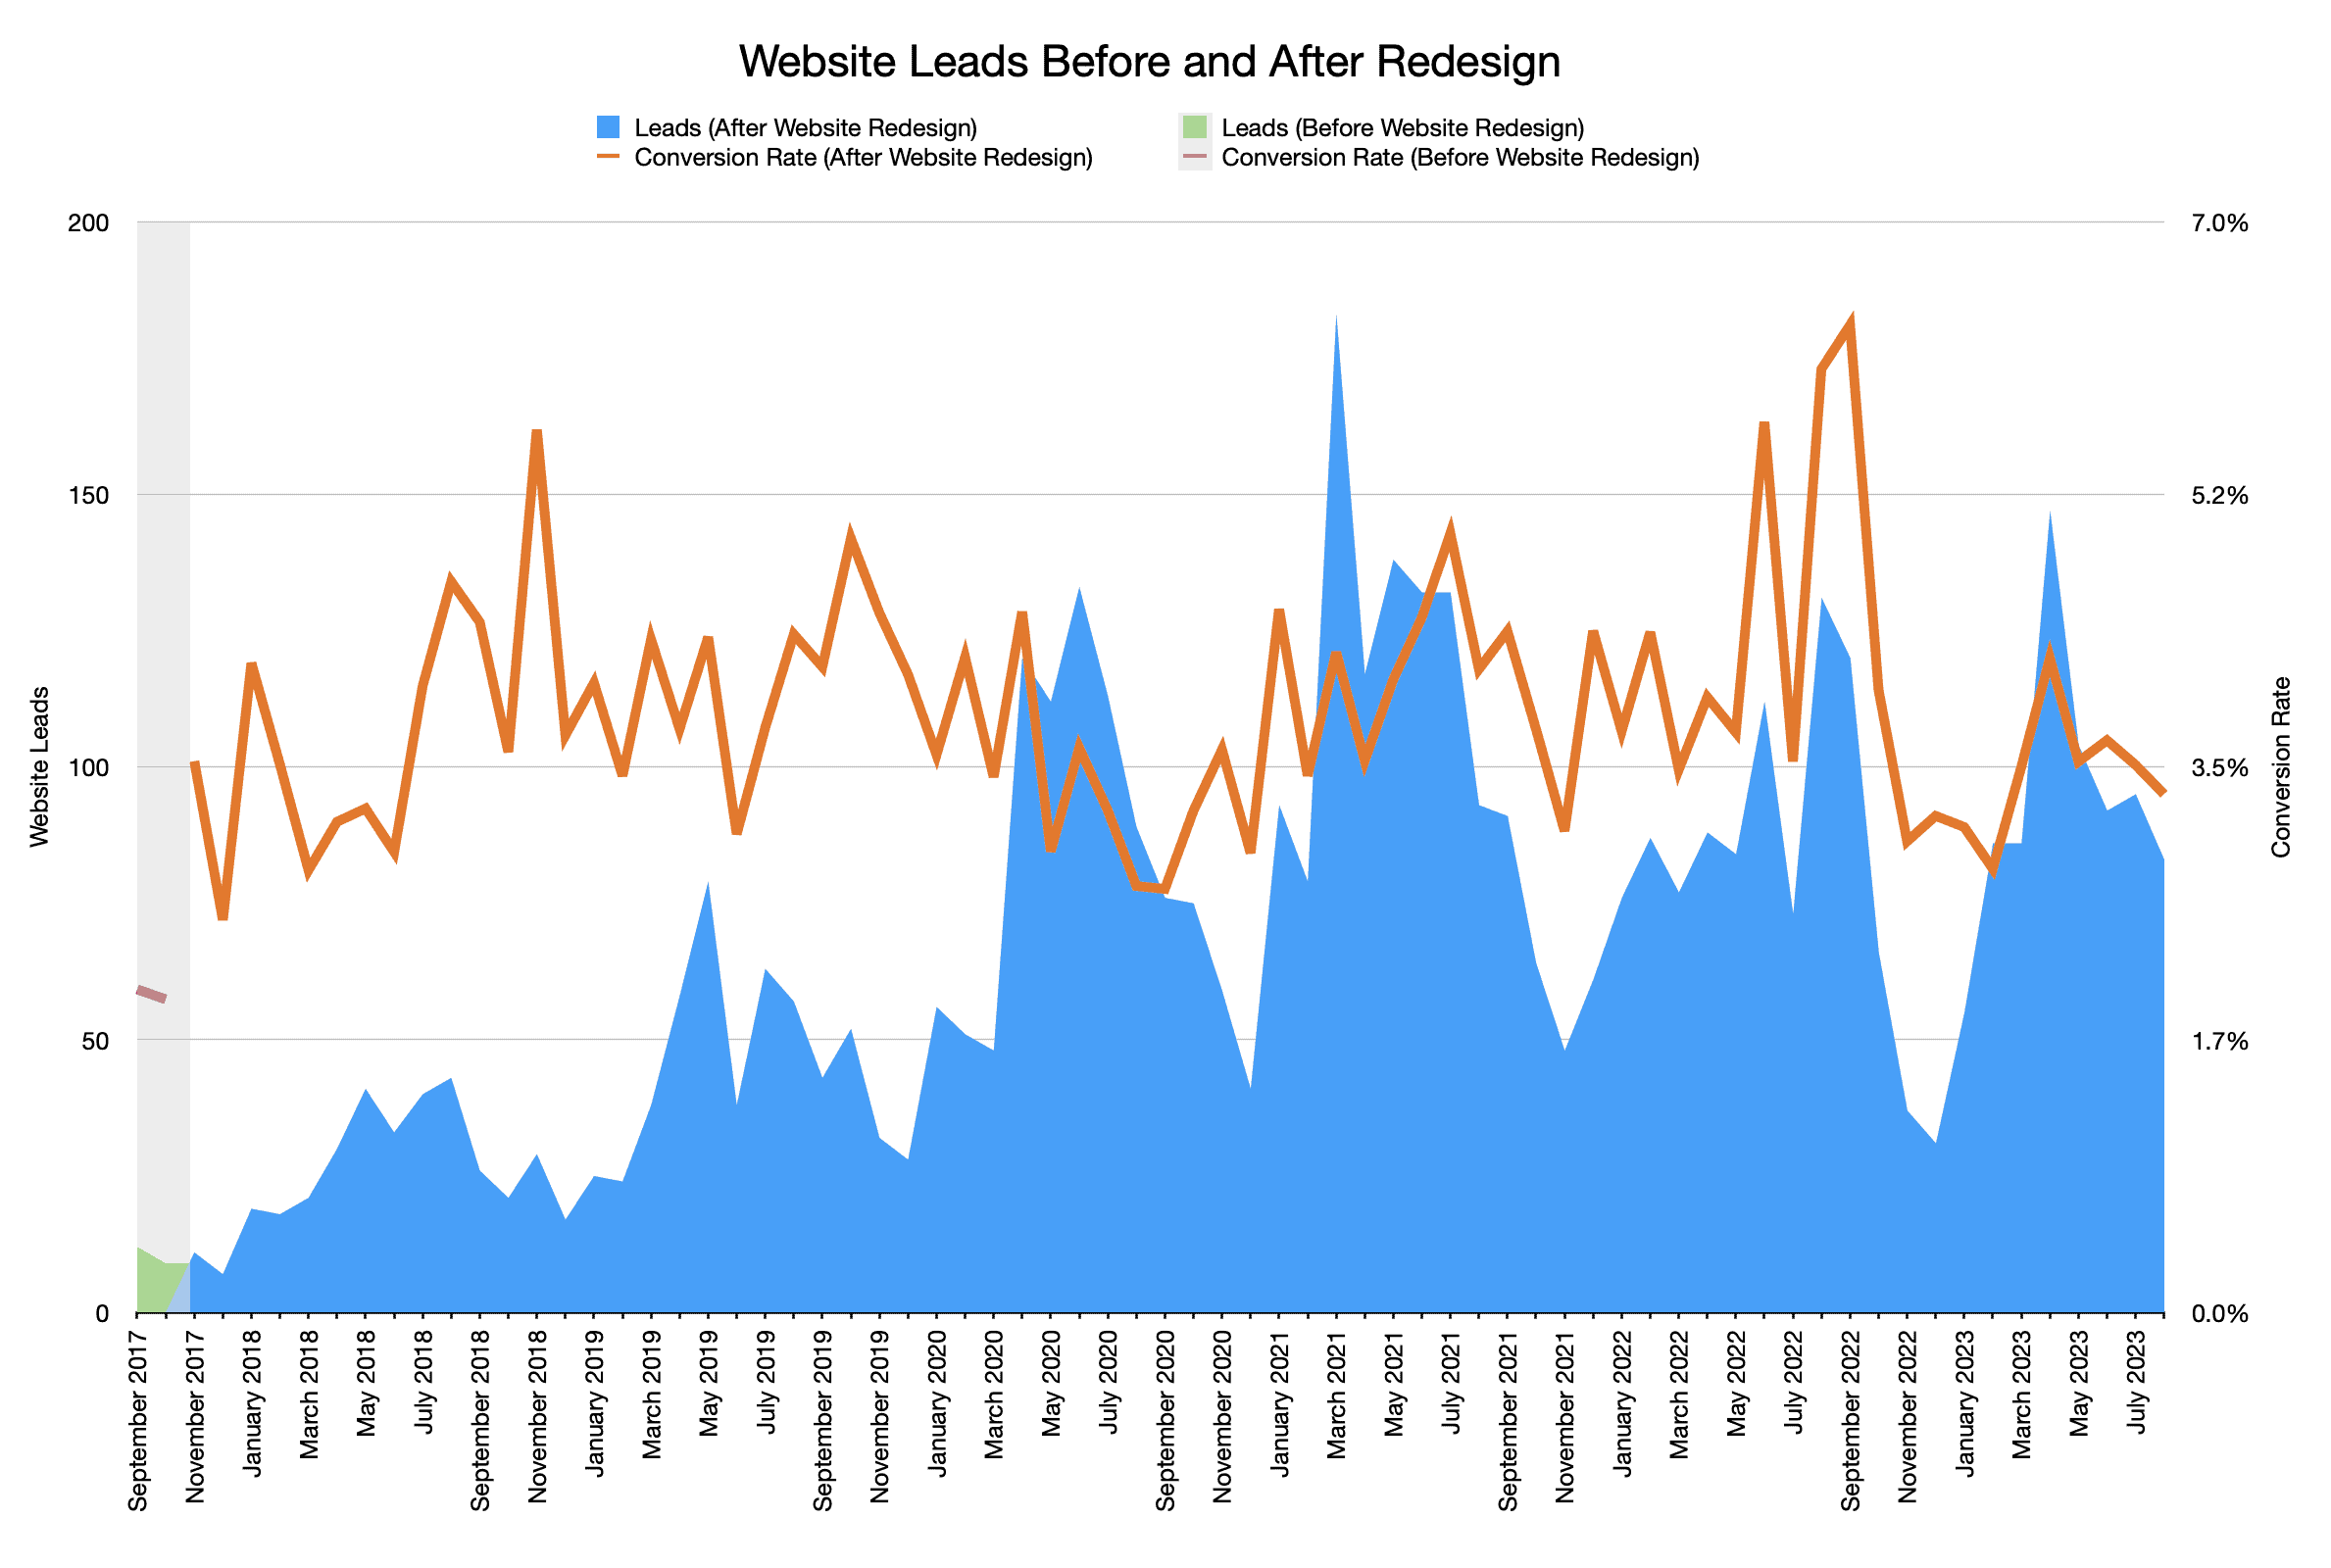 Website Leads Before and After Redesign - Chart over time